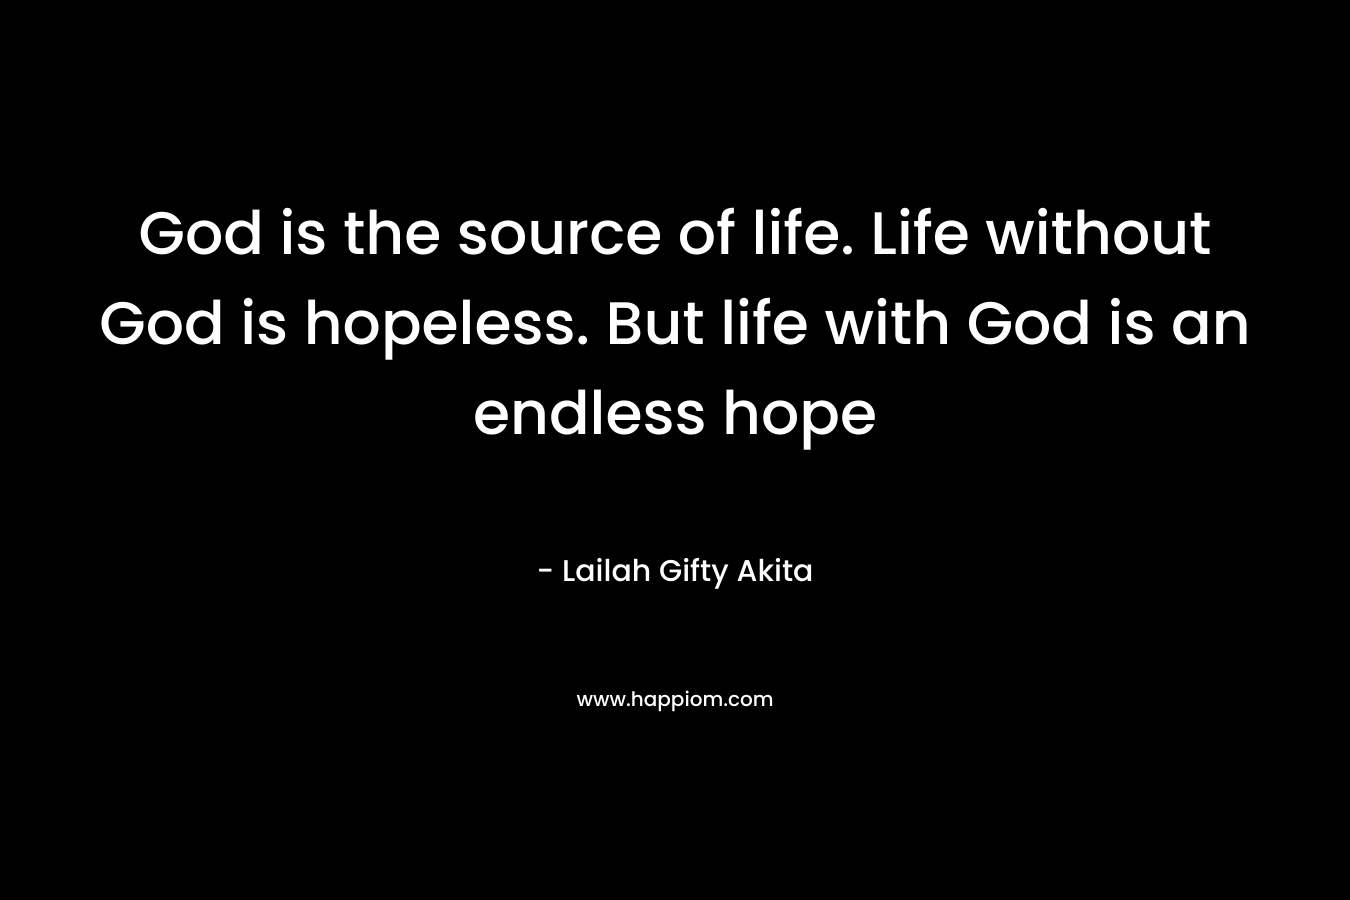 God is the source of life. Life without God is hopeless. But life with God is an endless hope